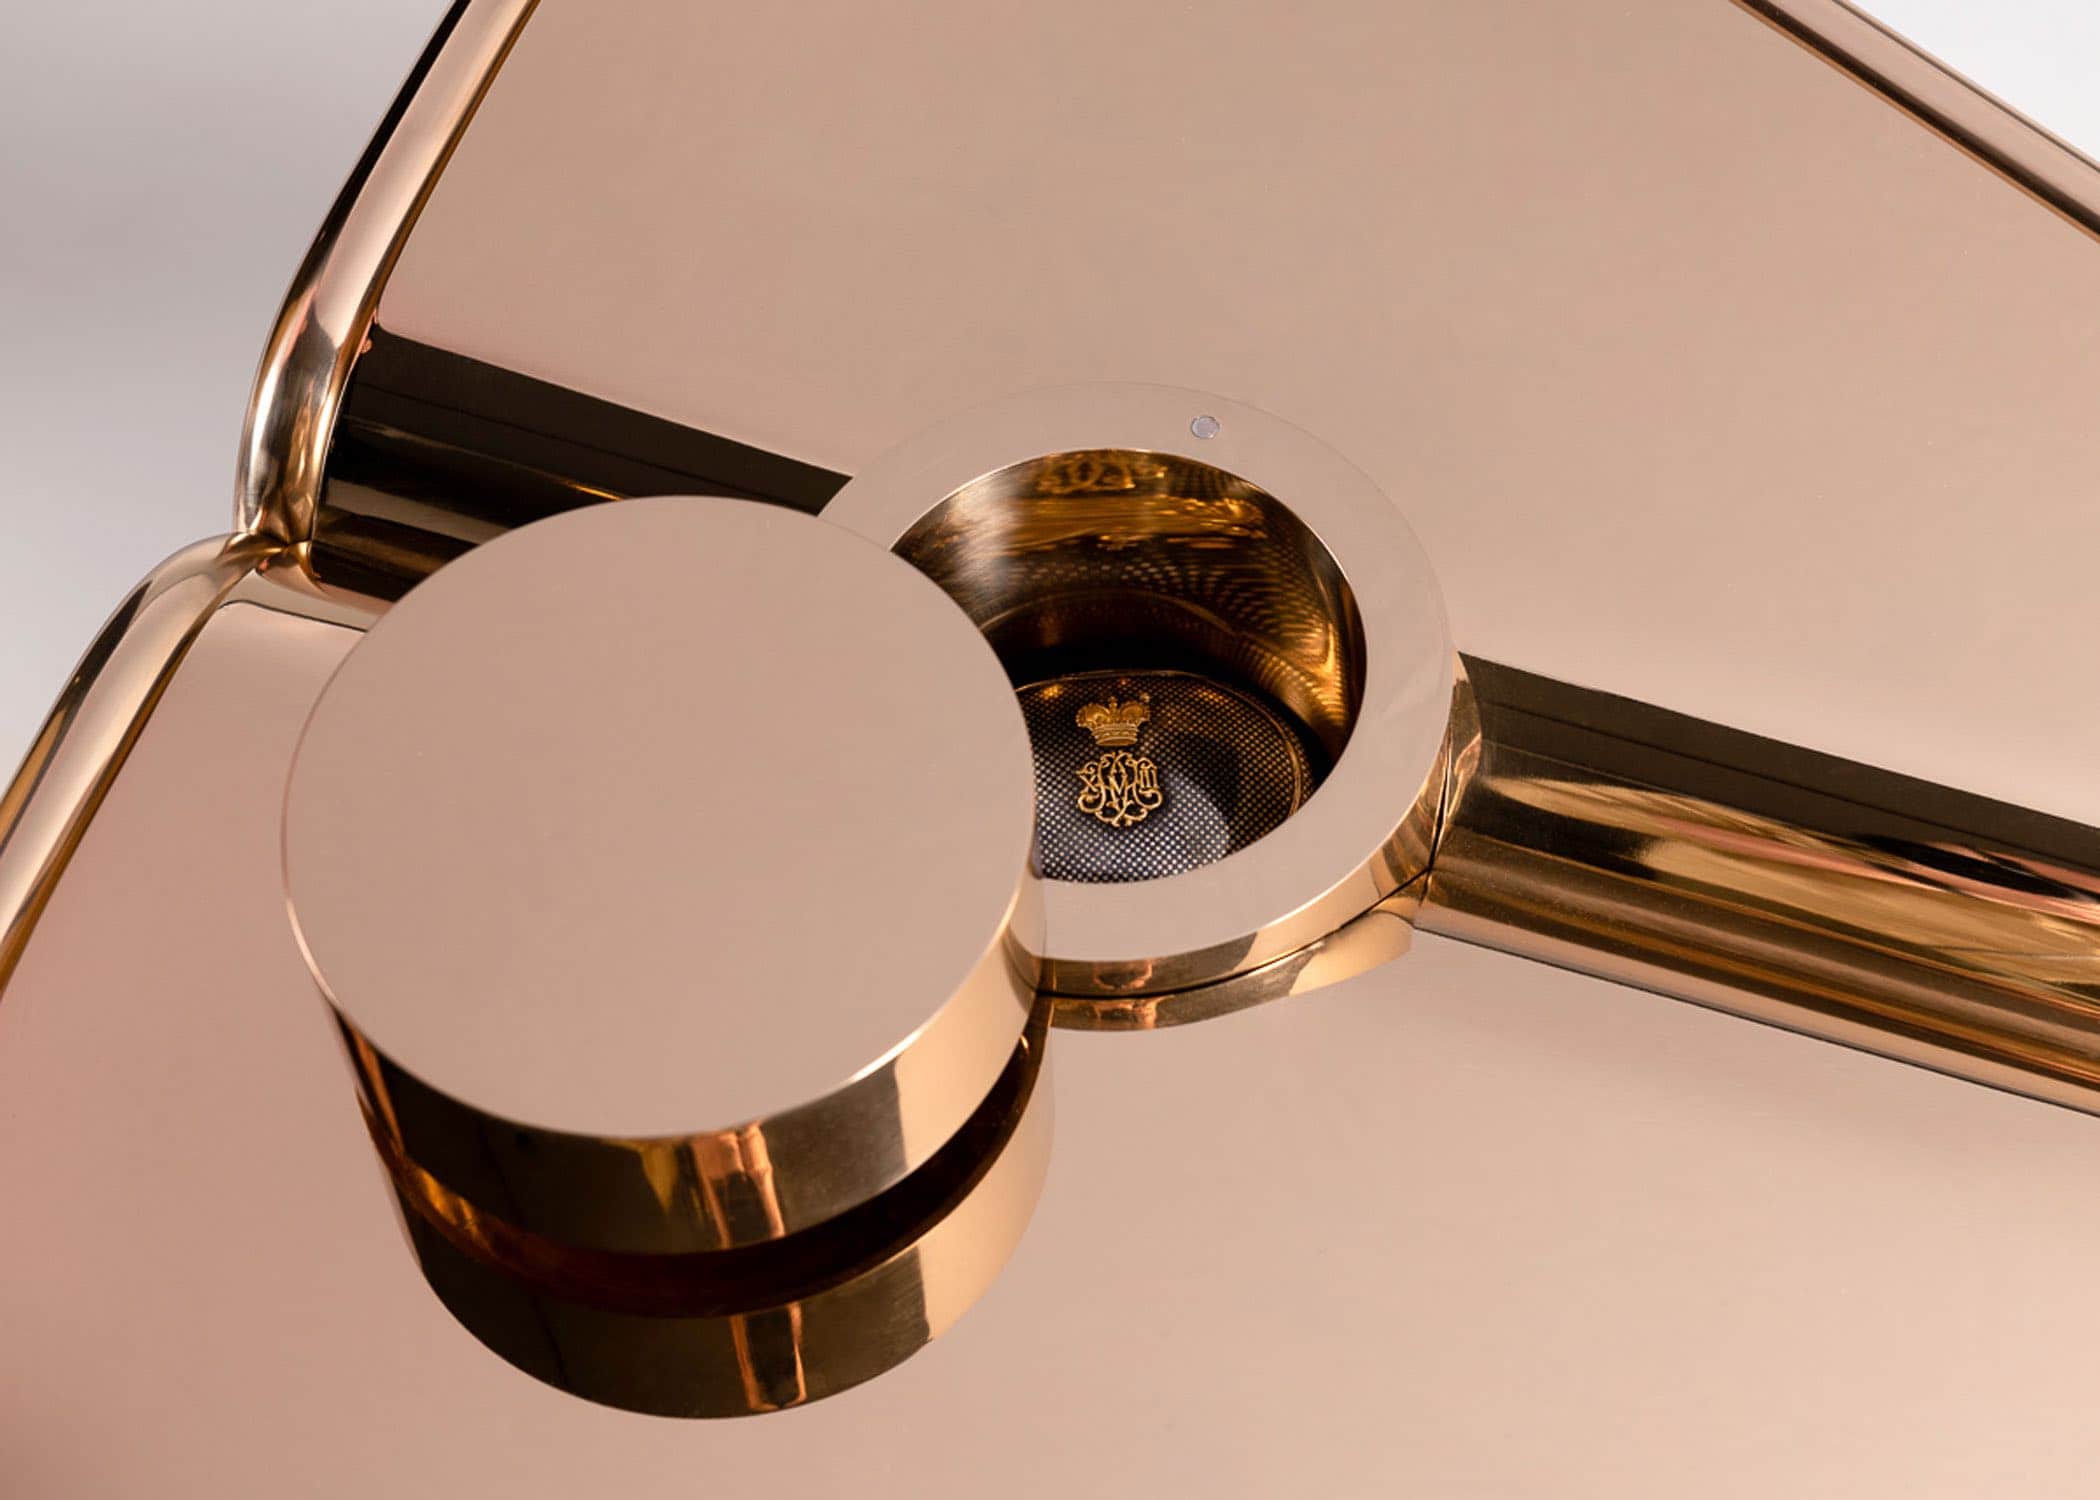 This image shows a close-up detail plan view of Second Empress Coffee Table designed by Carol Egan. Machined and polished silicon bronze cocktail coffee table with Upper and lower planes at opposing angles mirrored and intersected by a cylindrical form with swivel lid to reveal a concealed storage space.  The peripheral form of the coffee table is trimmed by a bisecting cylindrical edging.  The table is cantilevered from the upright cylindrical form to hover above the ground.  Dimensions of table are 26"w x 25"d x 16”h.